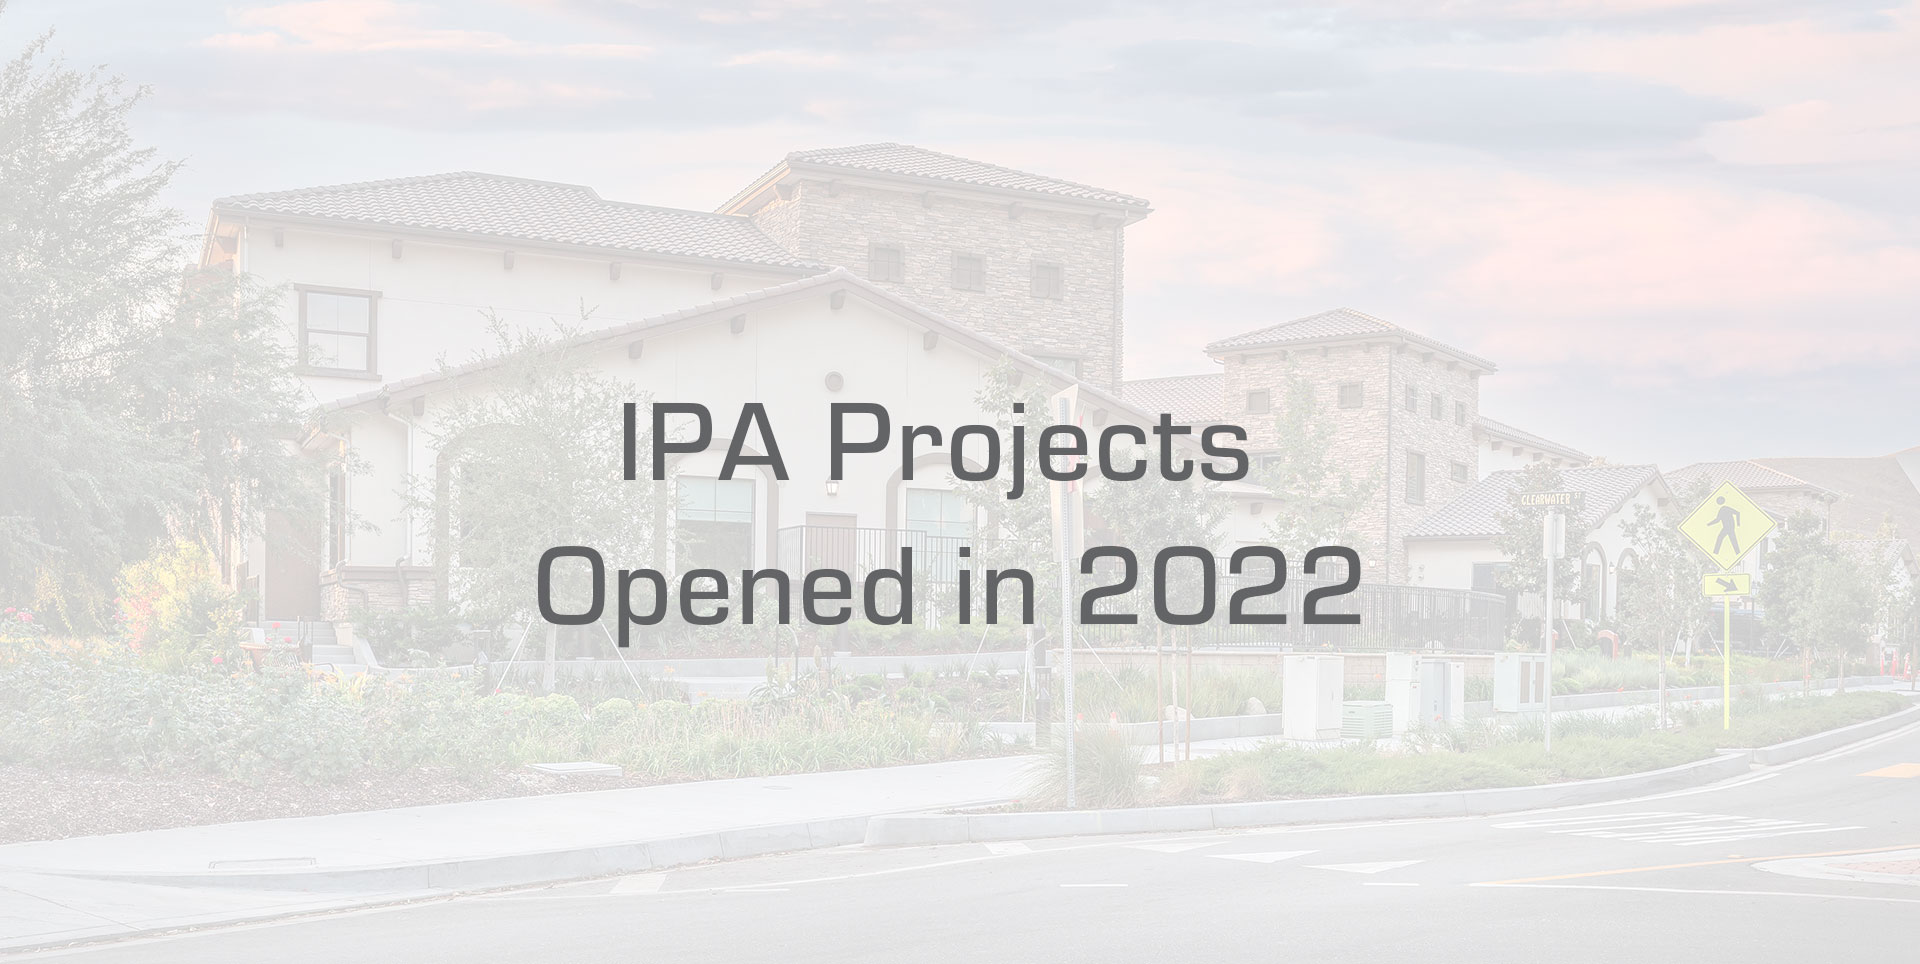 IPA Projects